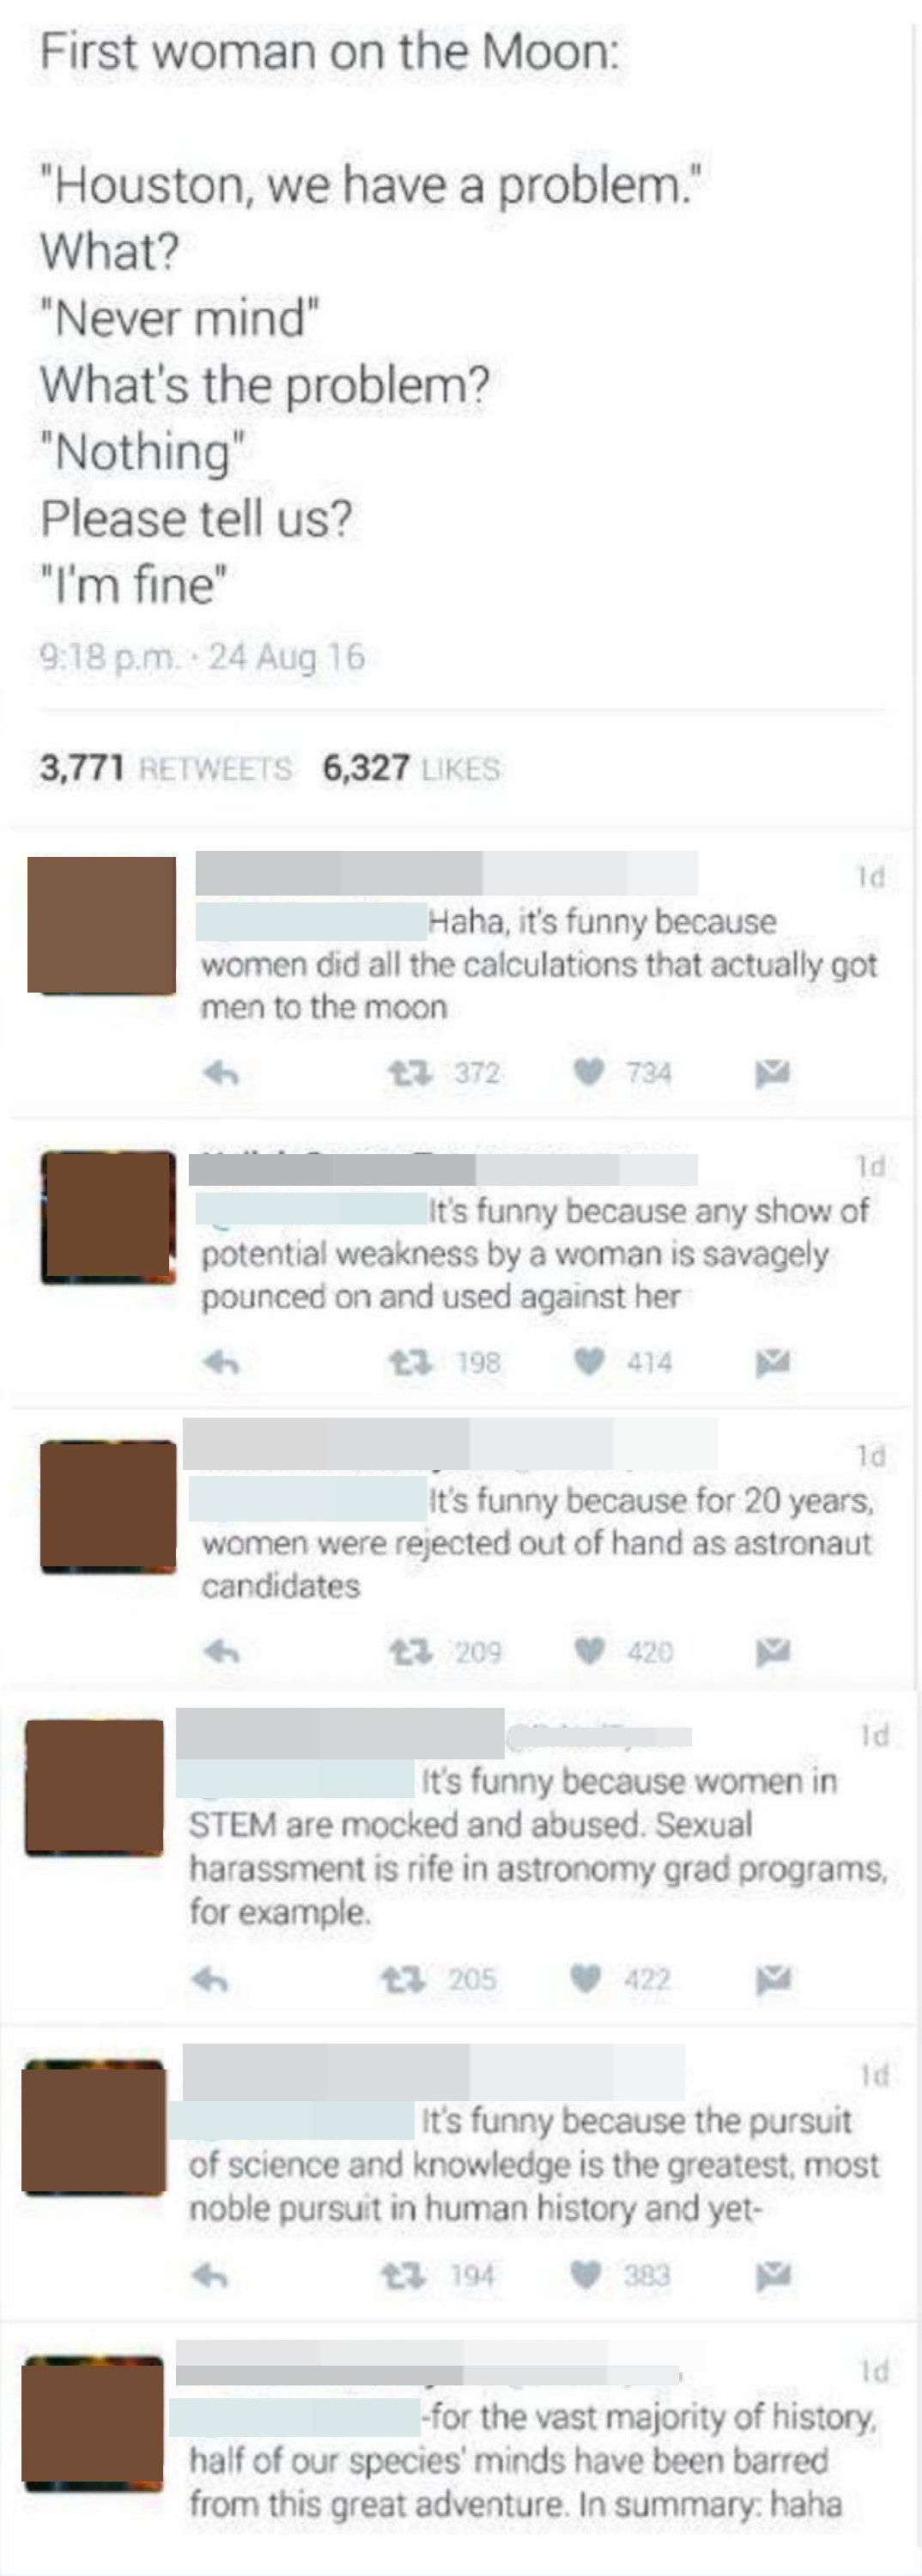 neil leaving several comments explaining that women have been left out of STEM and science opportunities and yet the OP had the balls to make a stupid joke